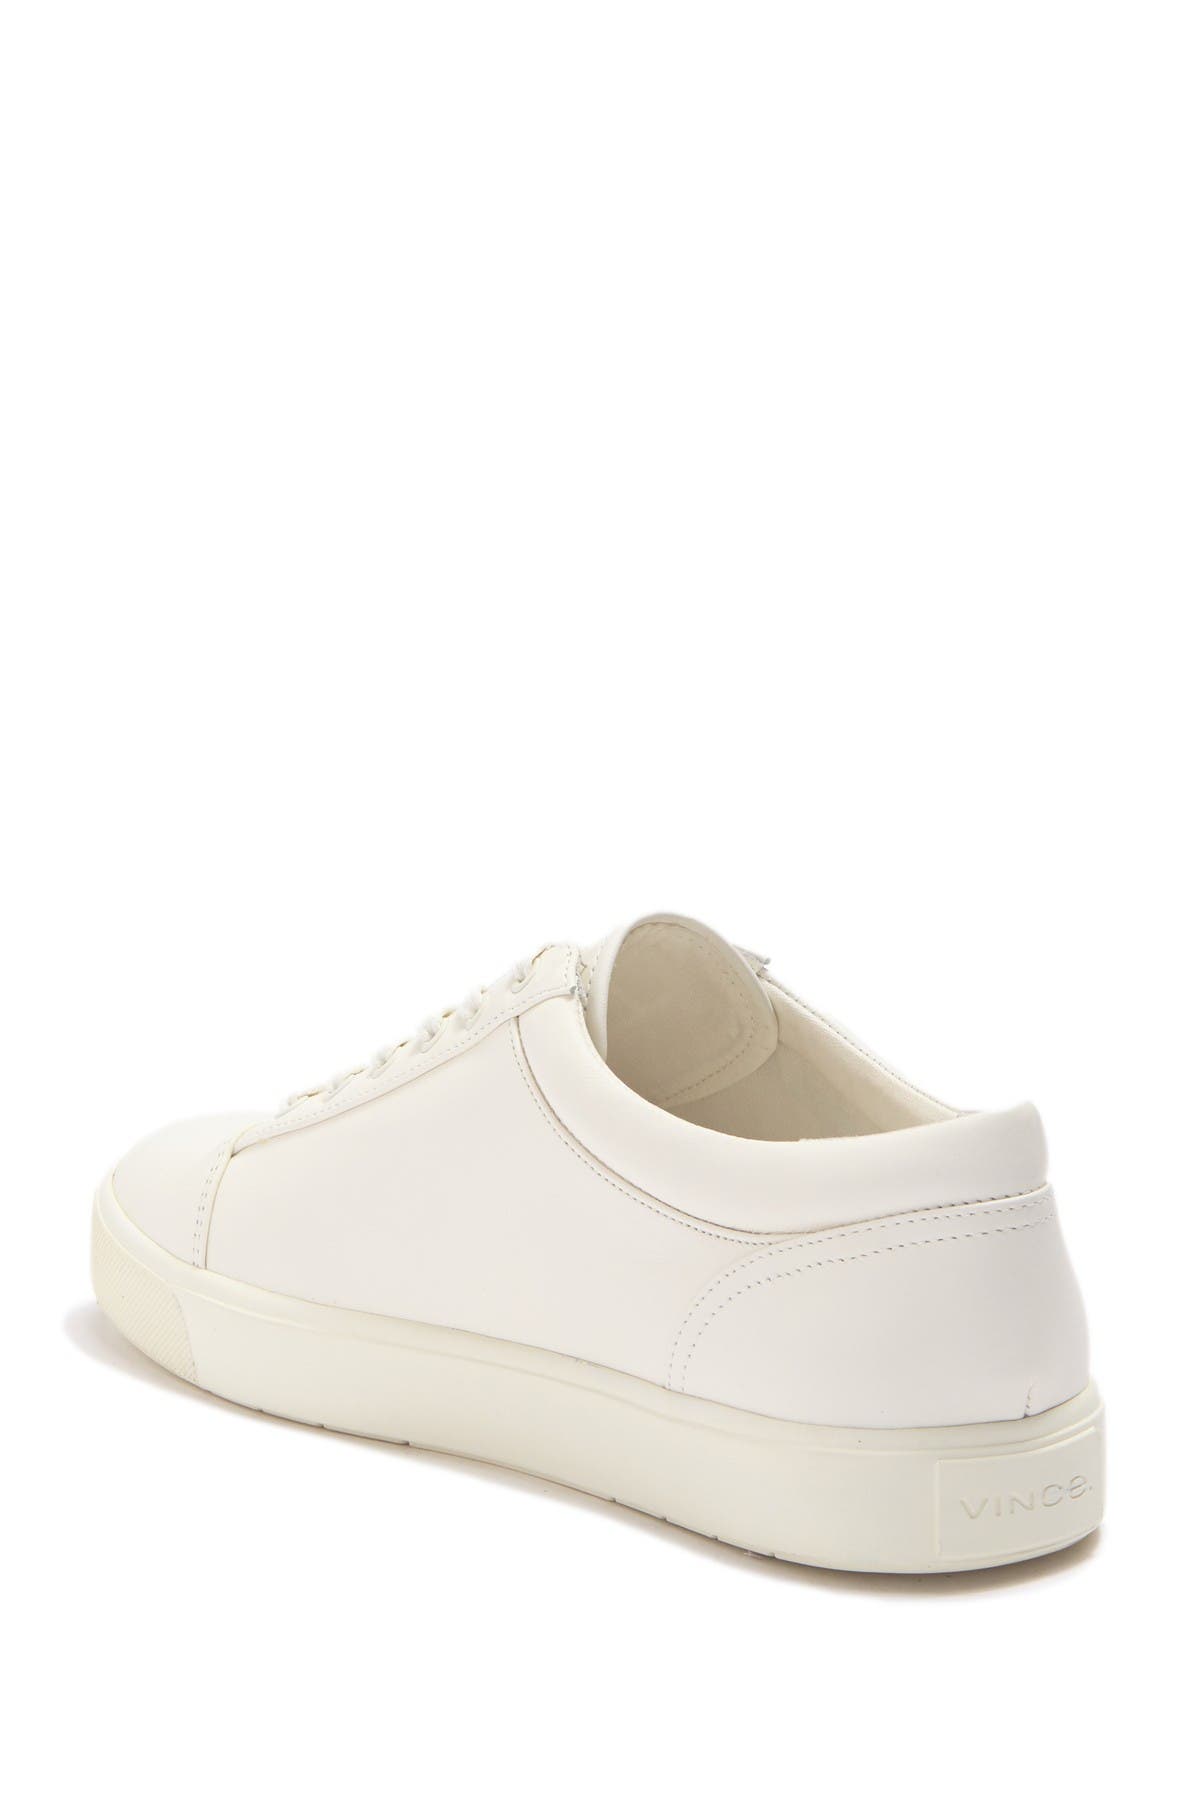 vince leather sneakers